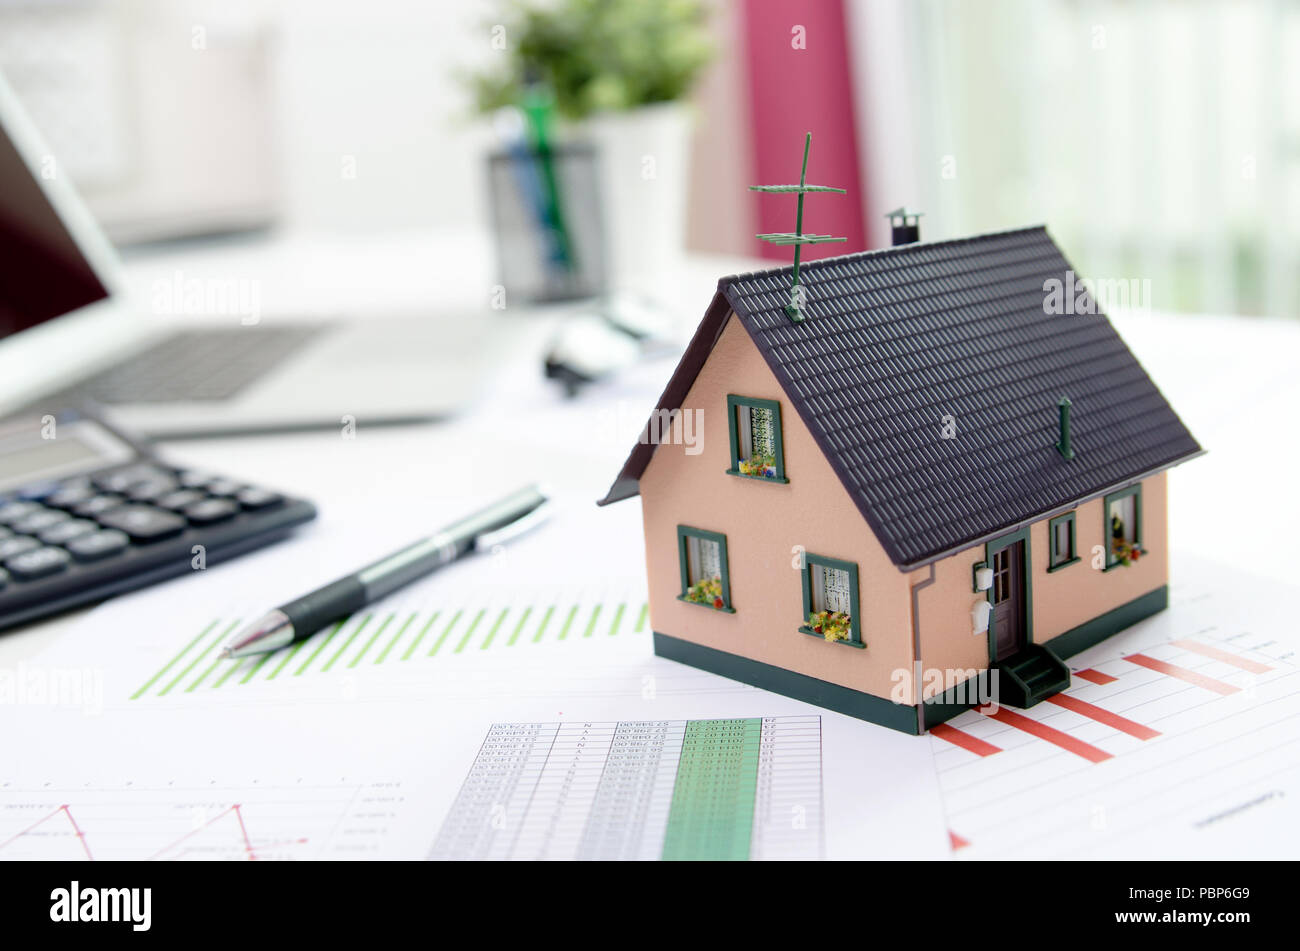 House model on desk, mortgage, investment or house building concept Stock Photo